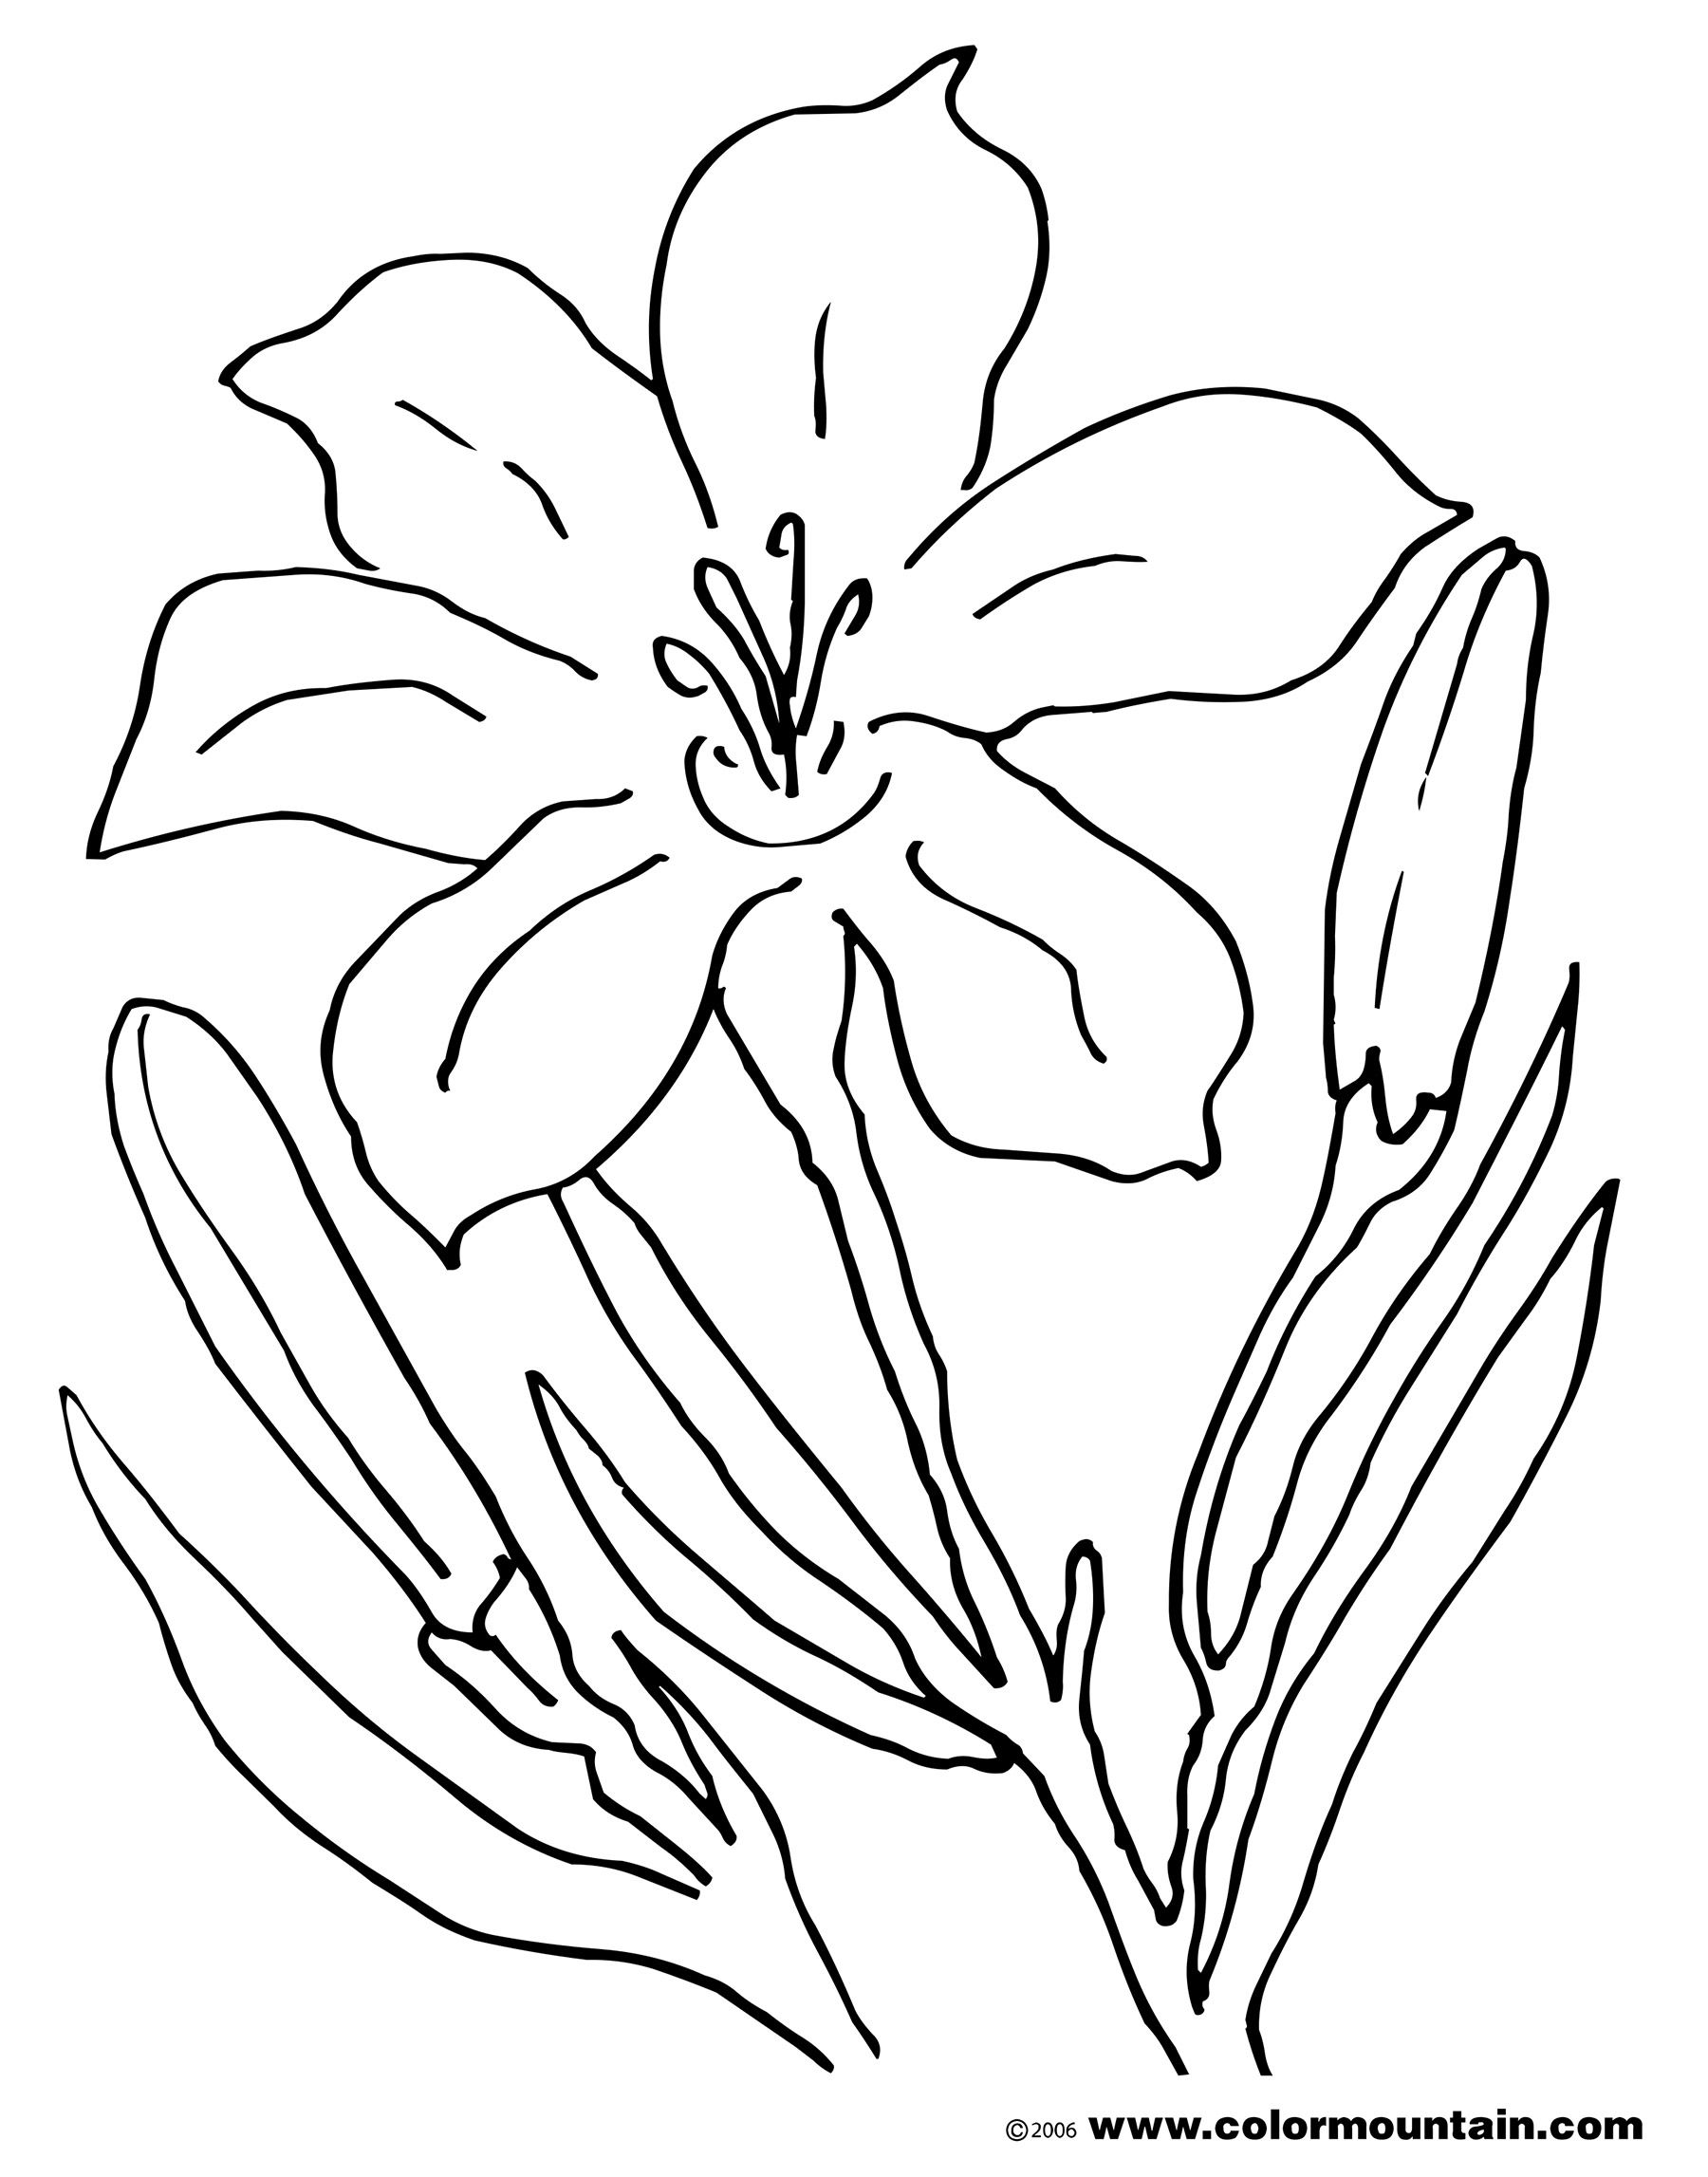 Tiger Lily Coloring Pages at GetDrawings.com | Free for ...